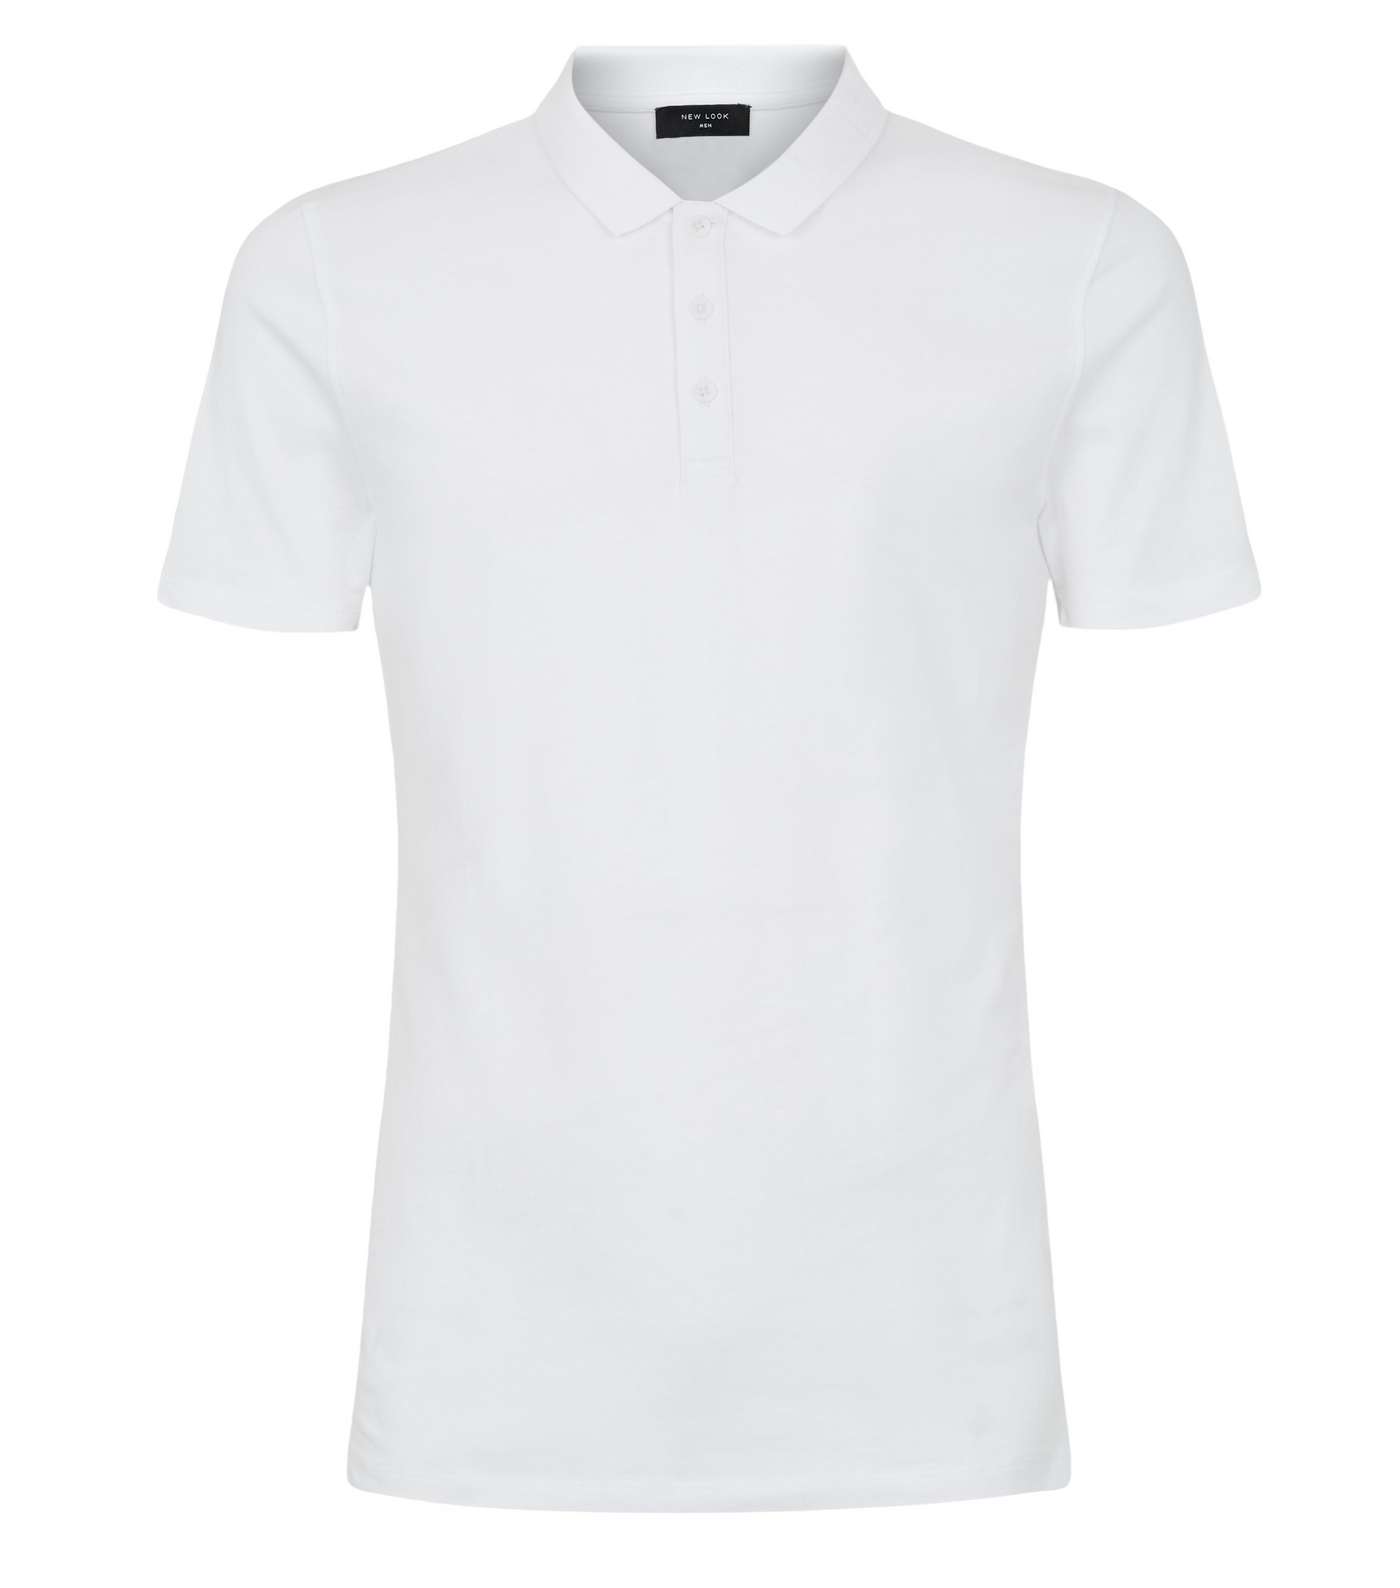 White Muscle Fit Polo Shirt Image 4